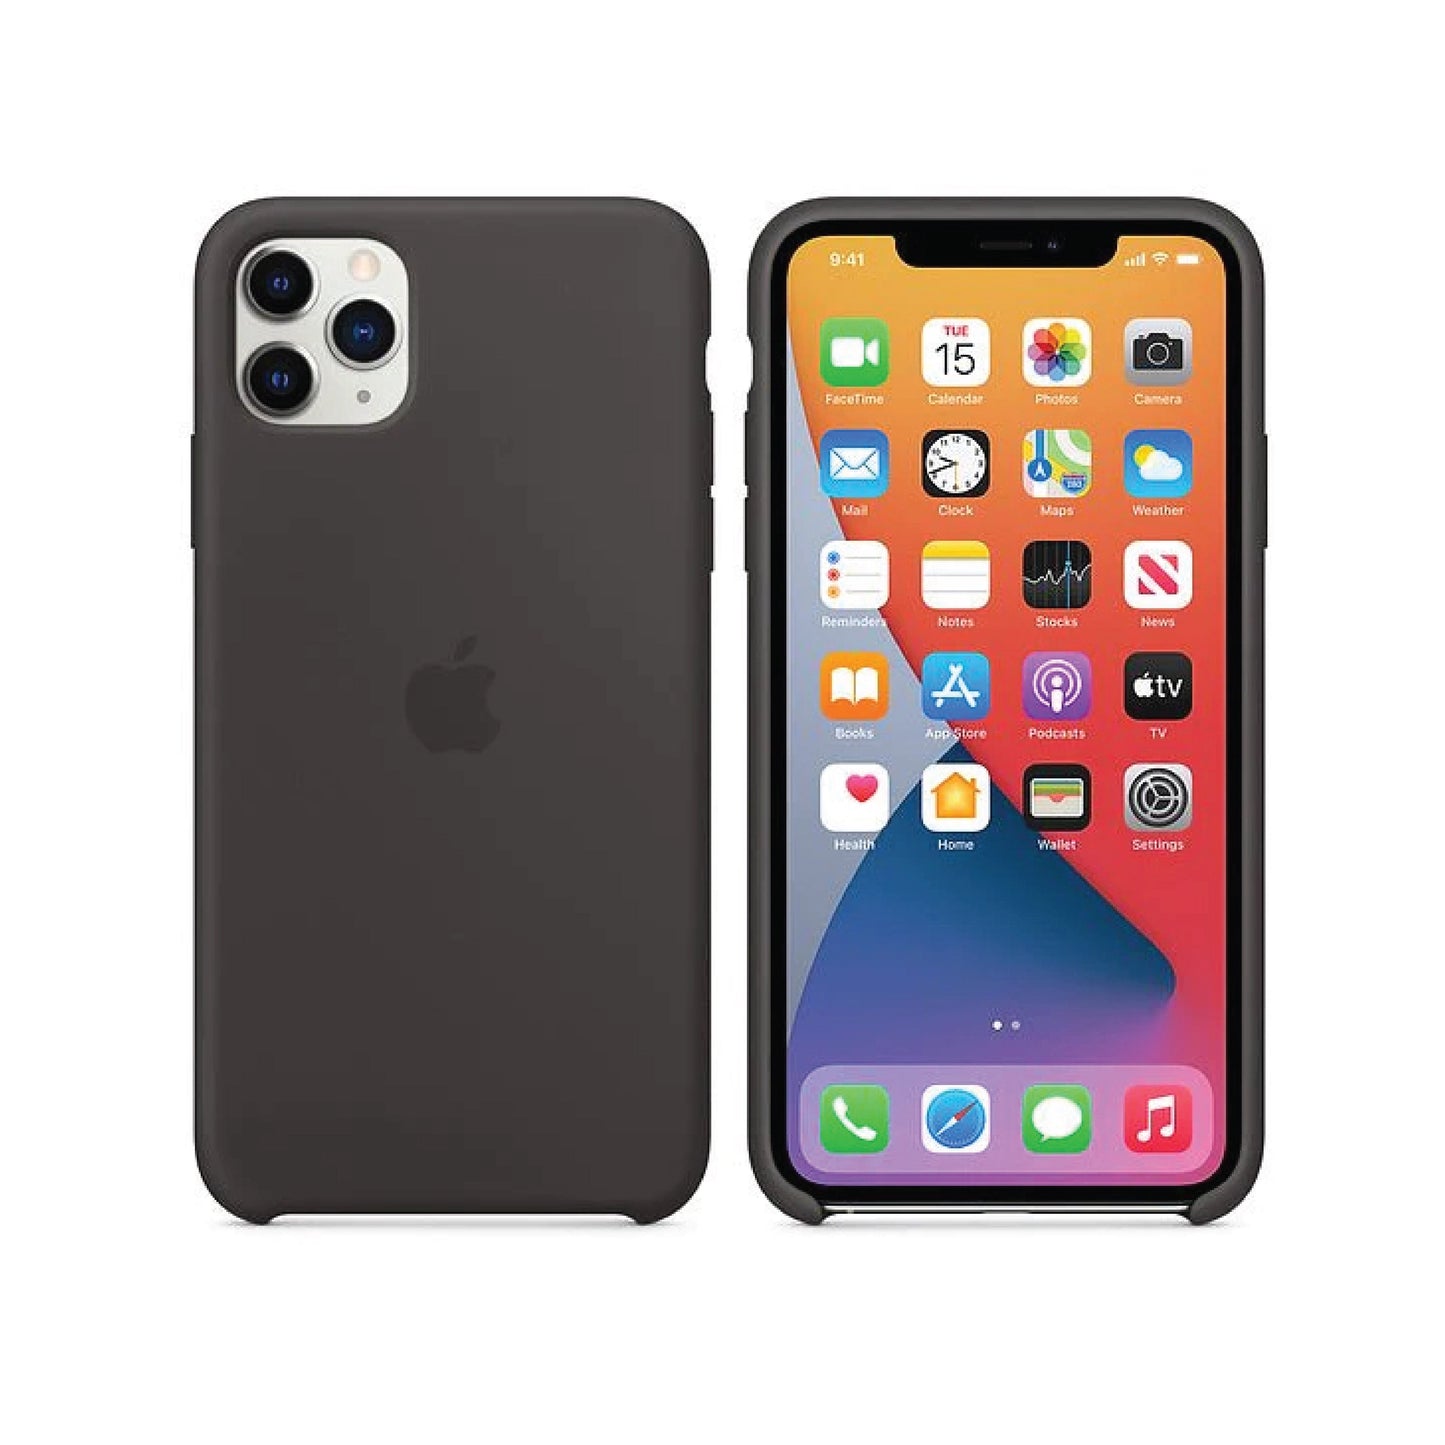 iPhone Official Silicon Case-Black